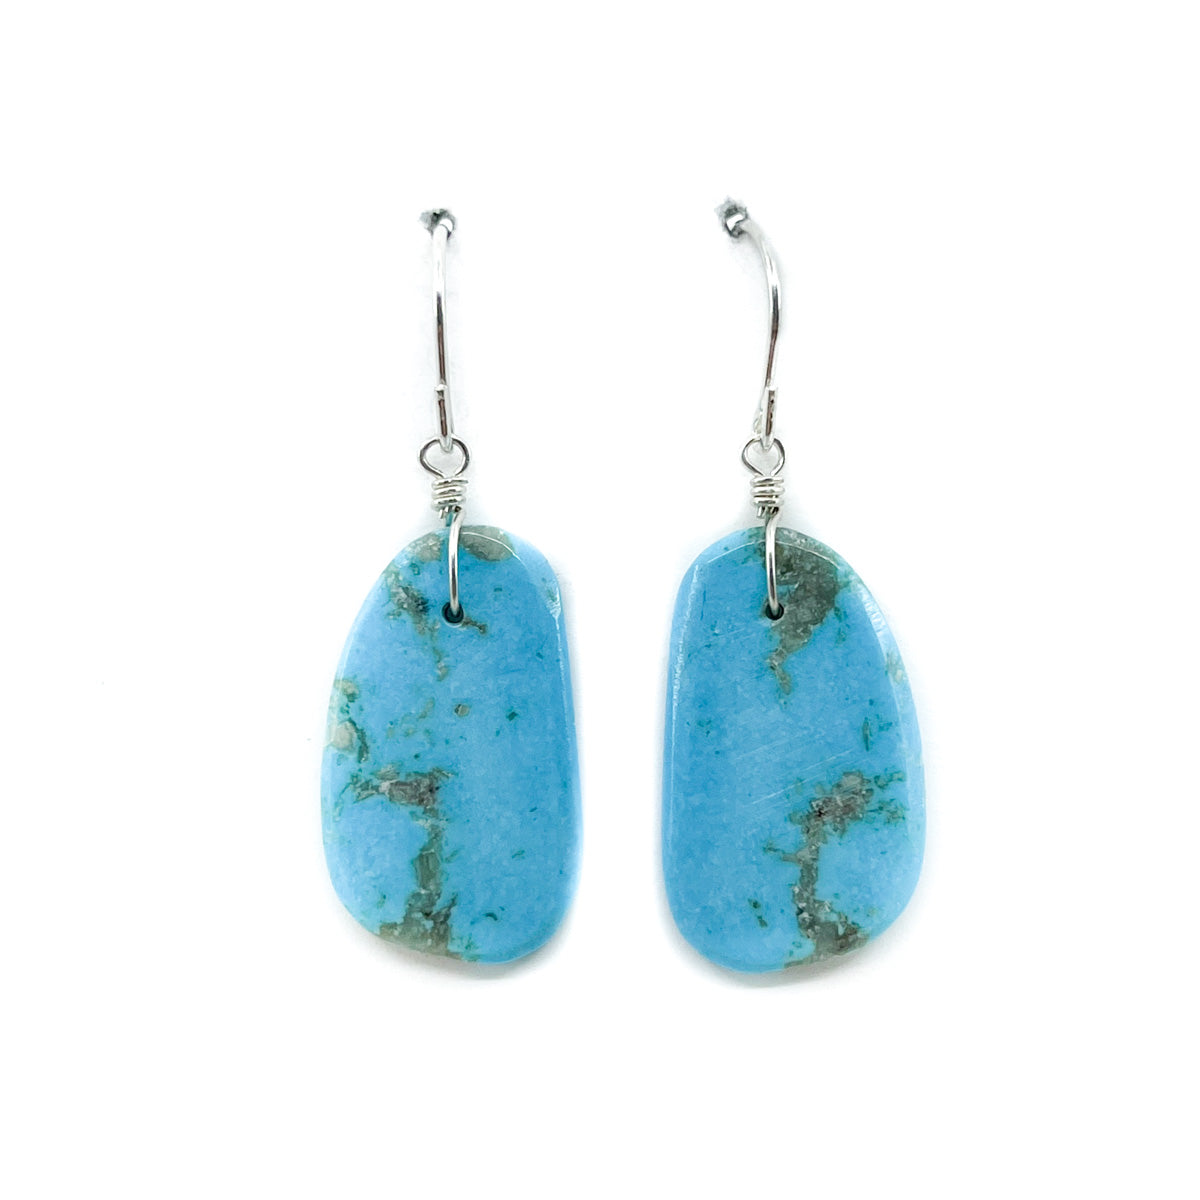 Blue Turquoise Slab Earrings with Gray Matrix